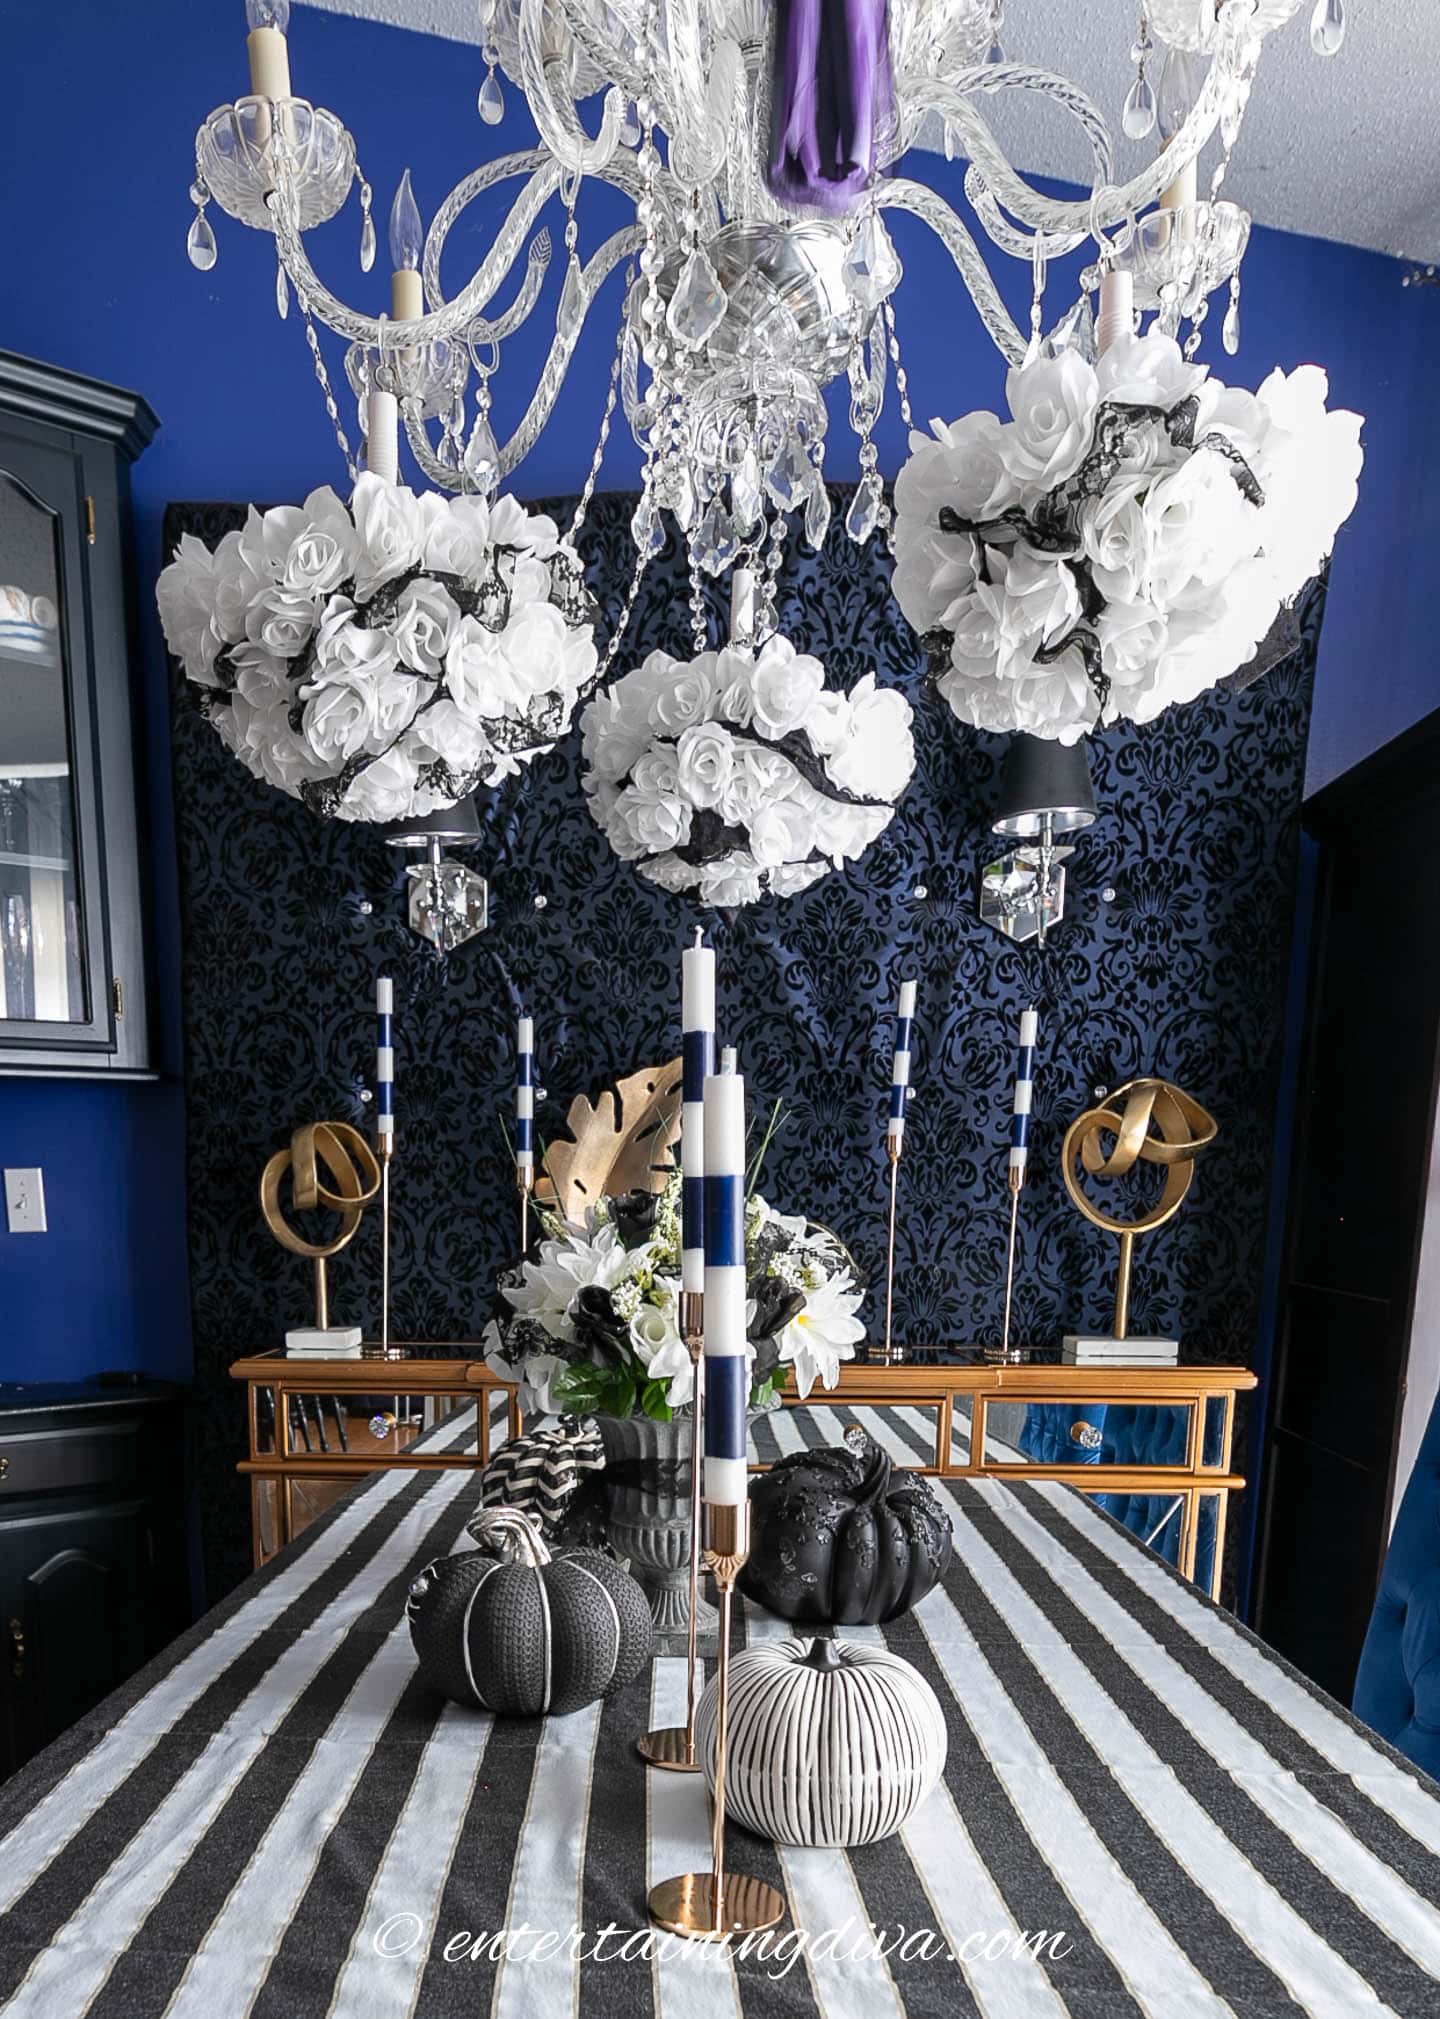 Beetlejuice dinner party table with a black and white striped tablecloth and black and white pumpkins and candles as the centerpiece